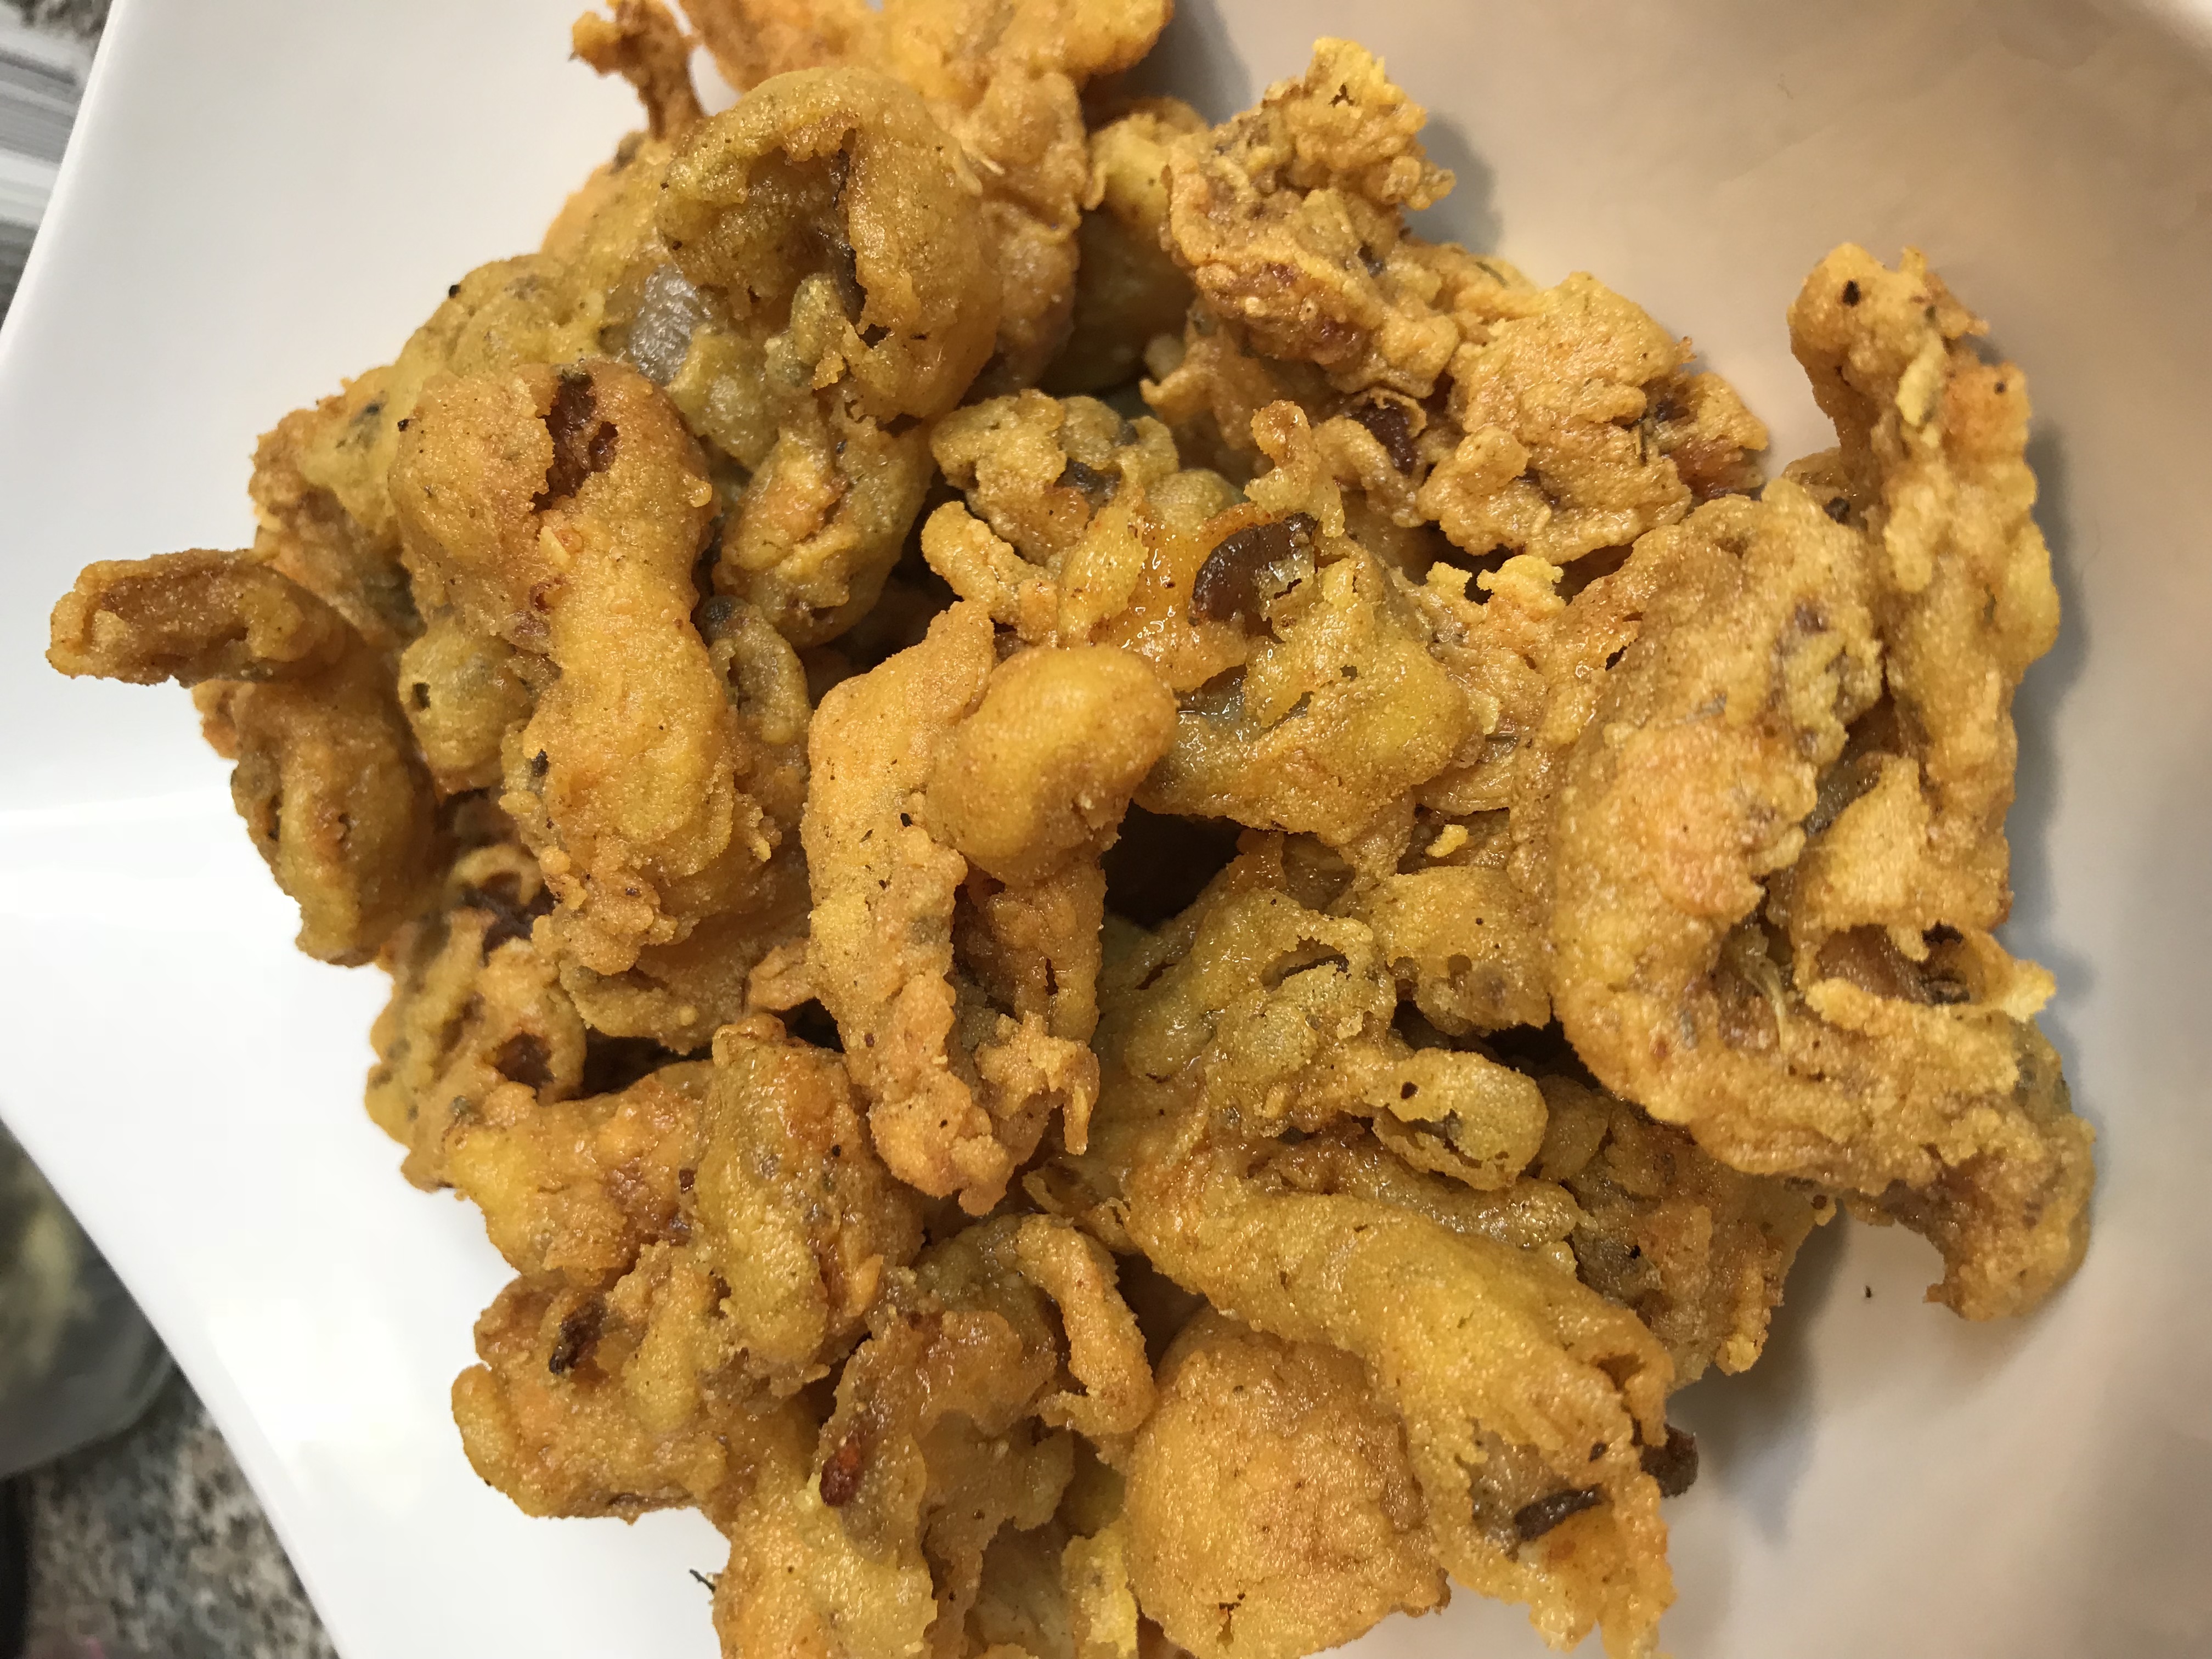 Fried Oyster mushrooms